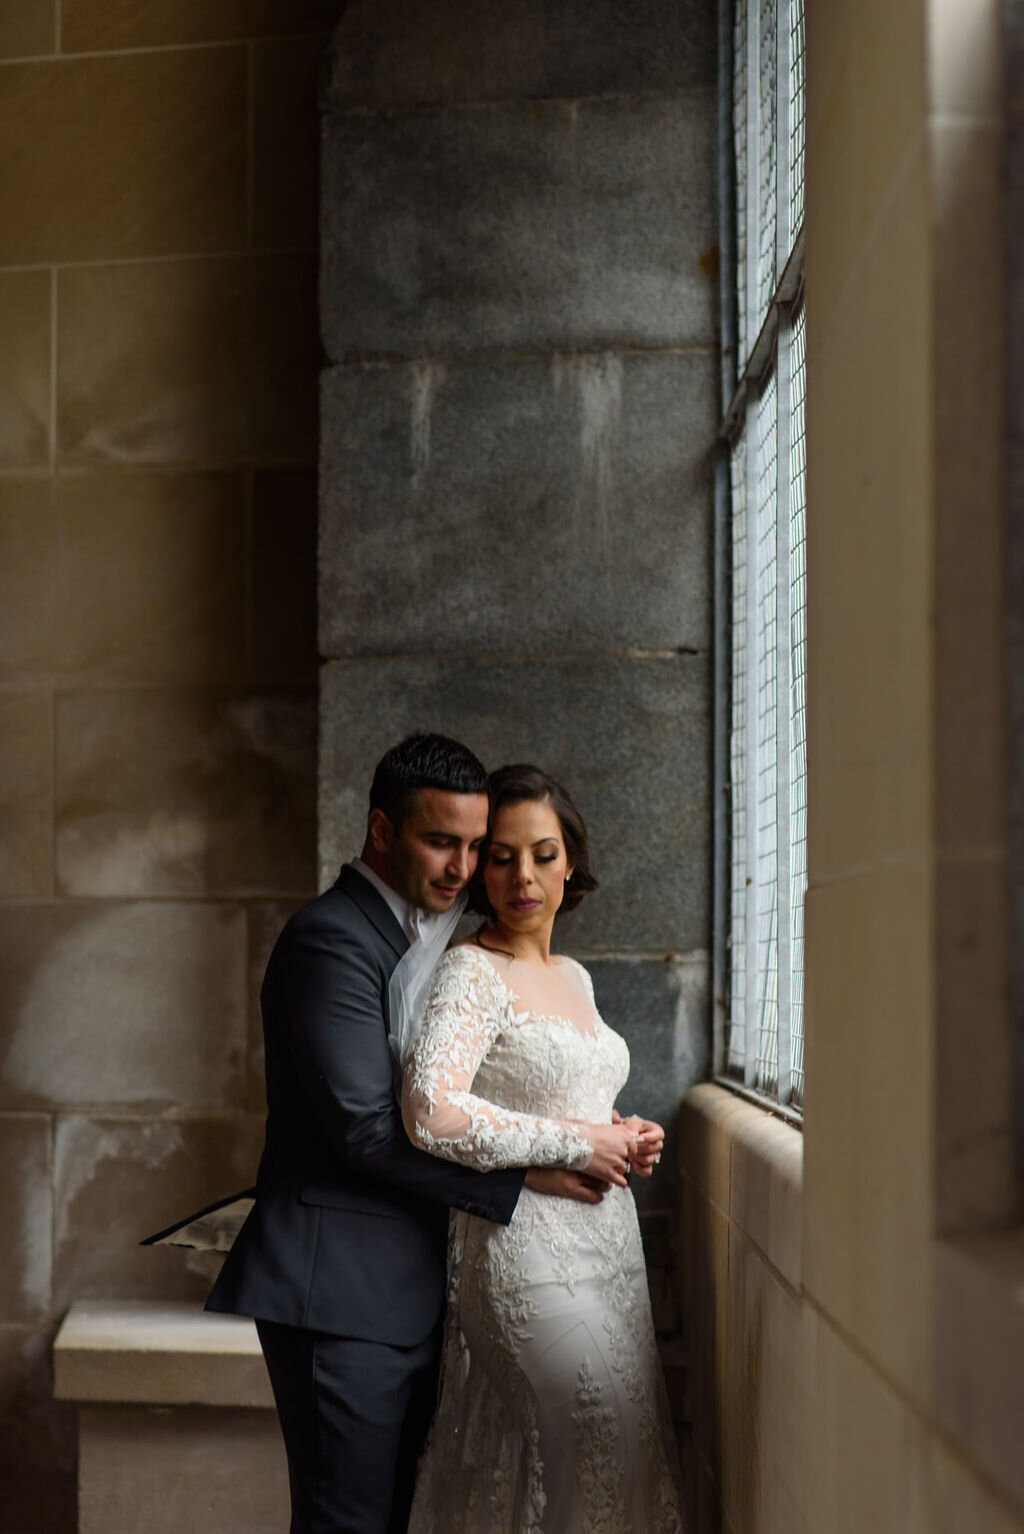 Groom embracing bride from behind while standing in front of a window near Chateau Laurier in Ottawa